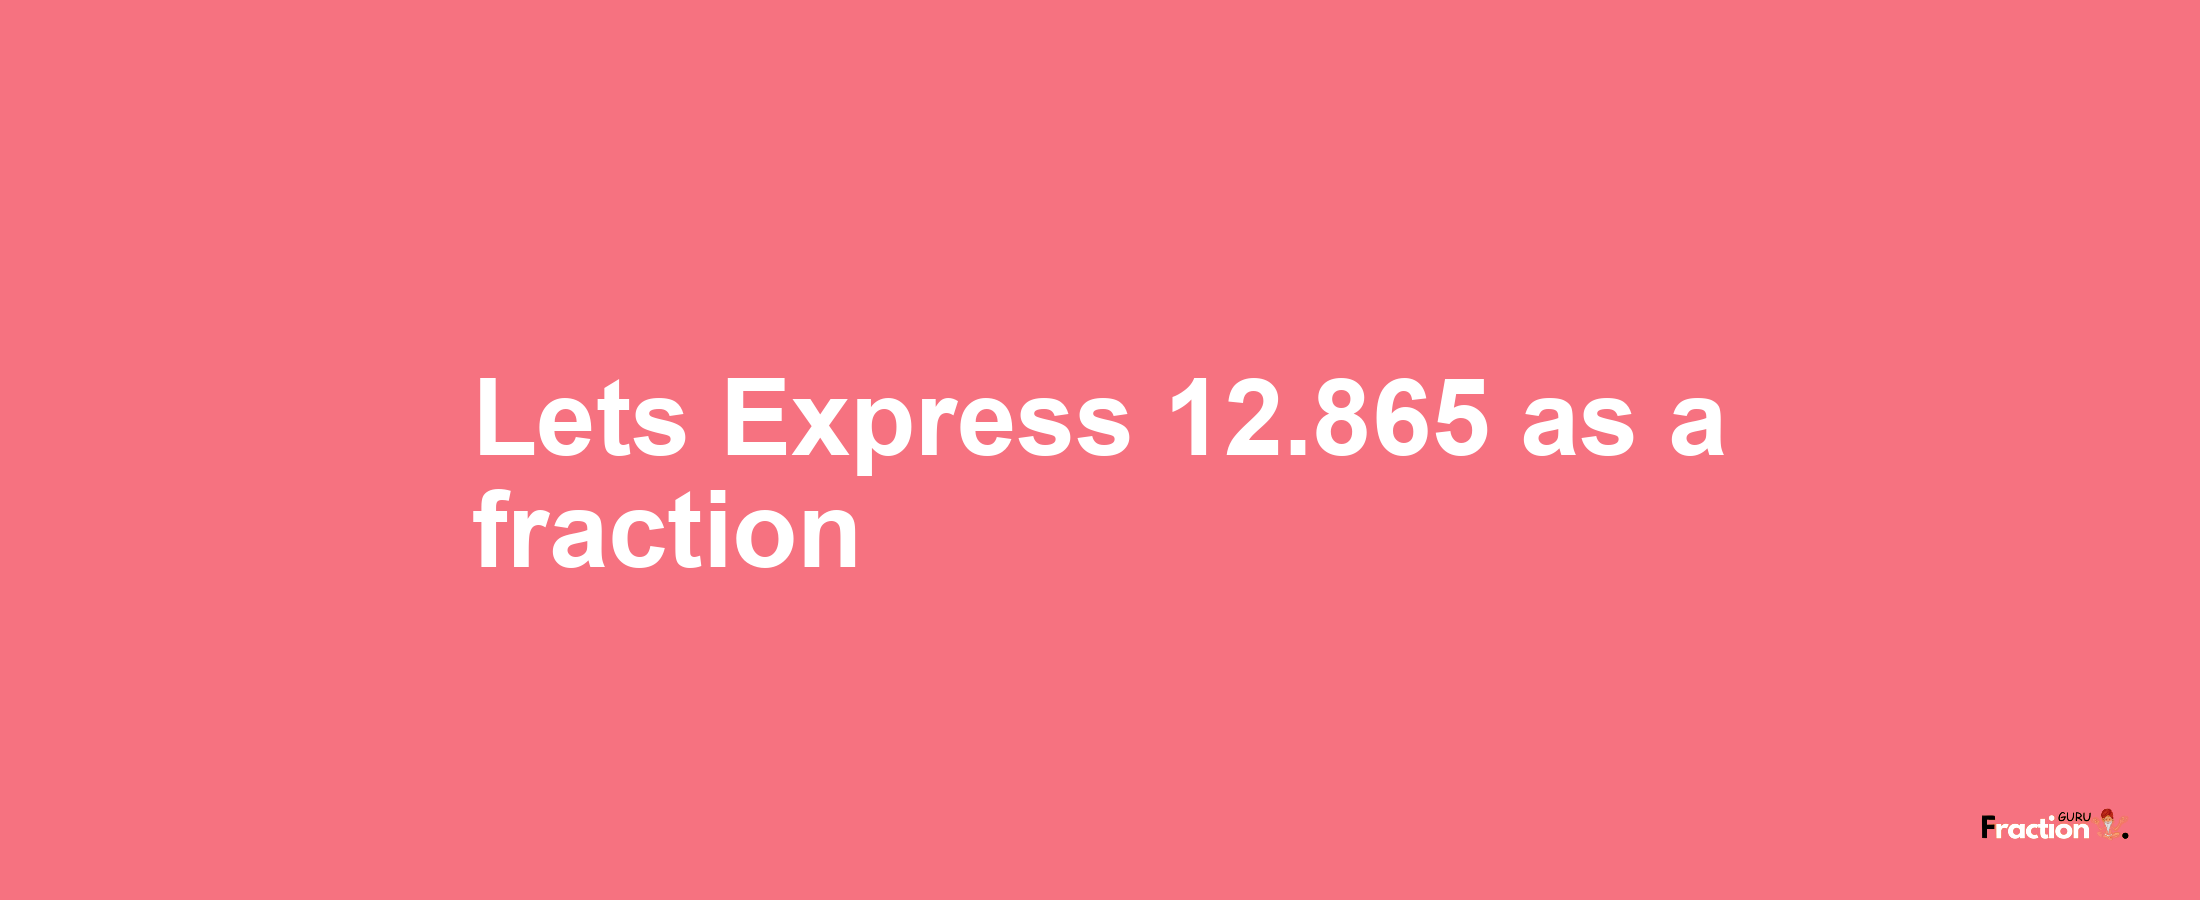 Lets Express 12.865 as afraction